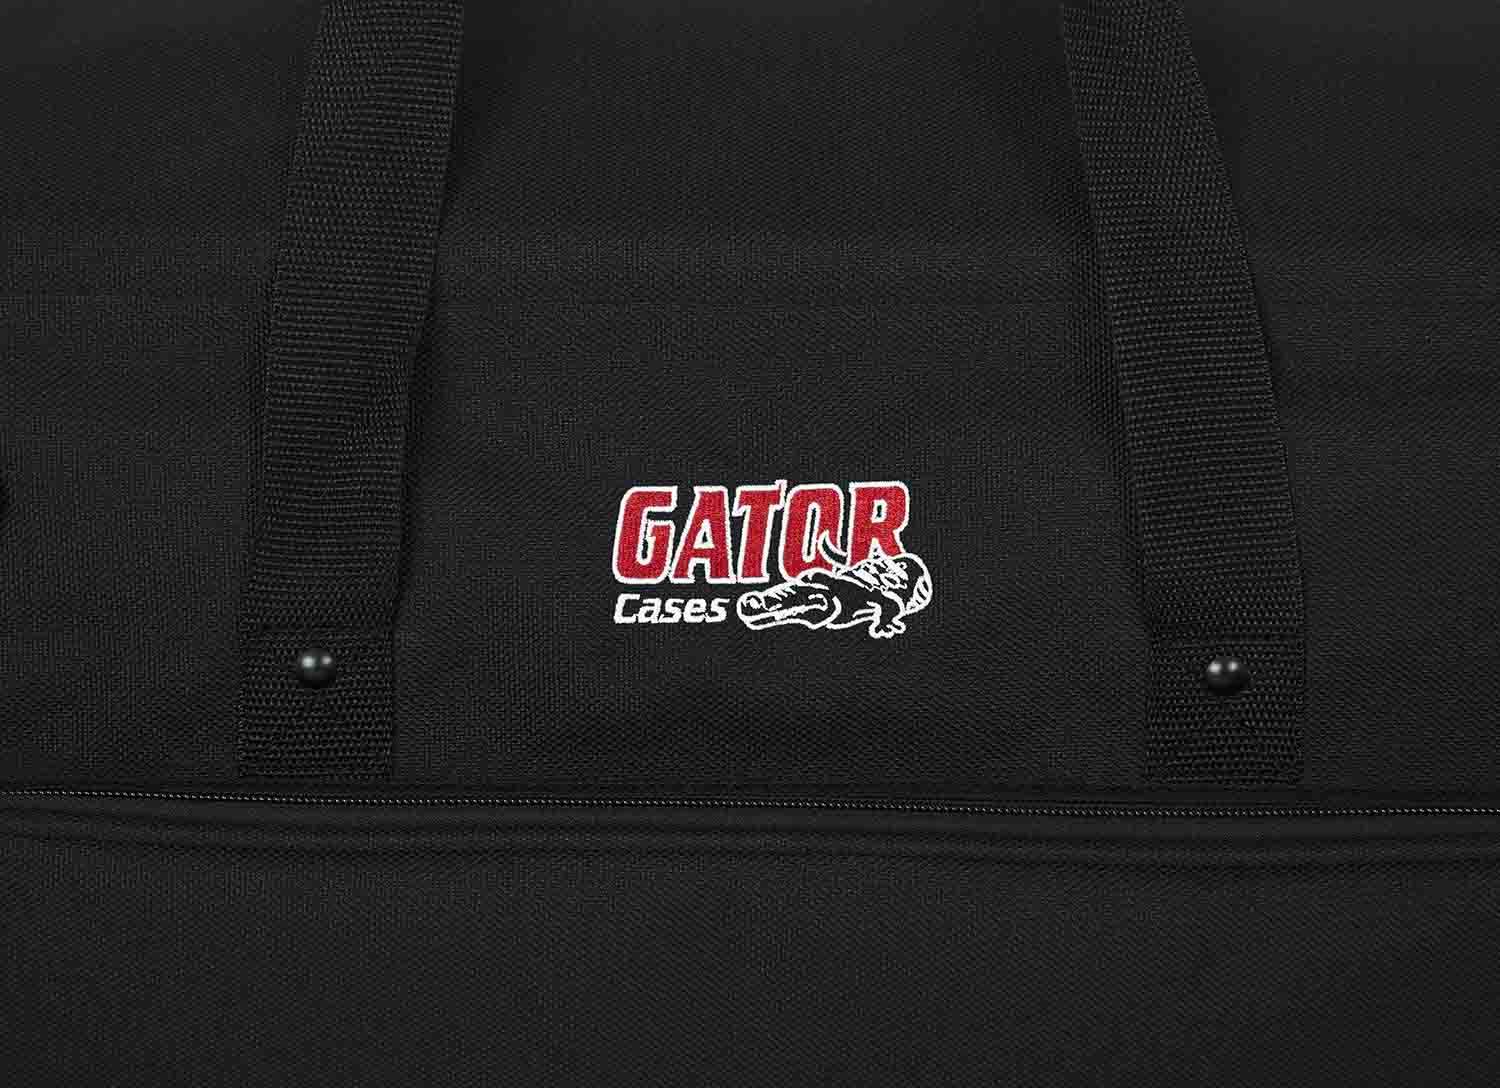 Gator Cases G-LCD-TOTE-MDX2 Nylon Carry DJ Bag for 2 LCD Screens - Hollywood DJ